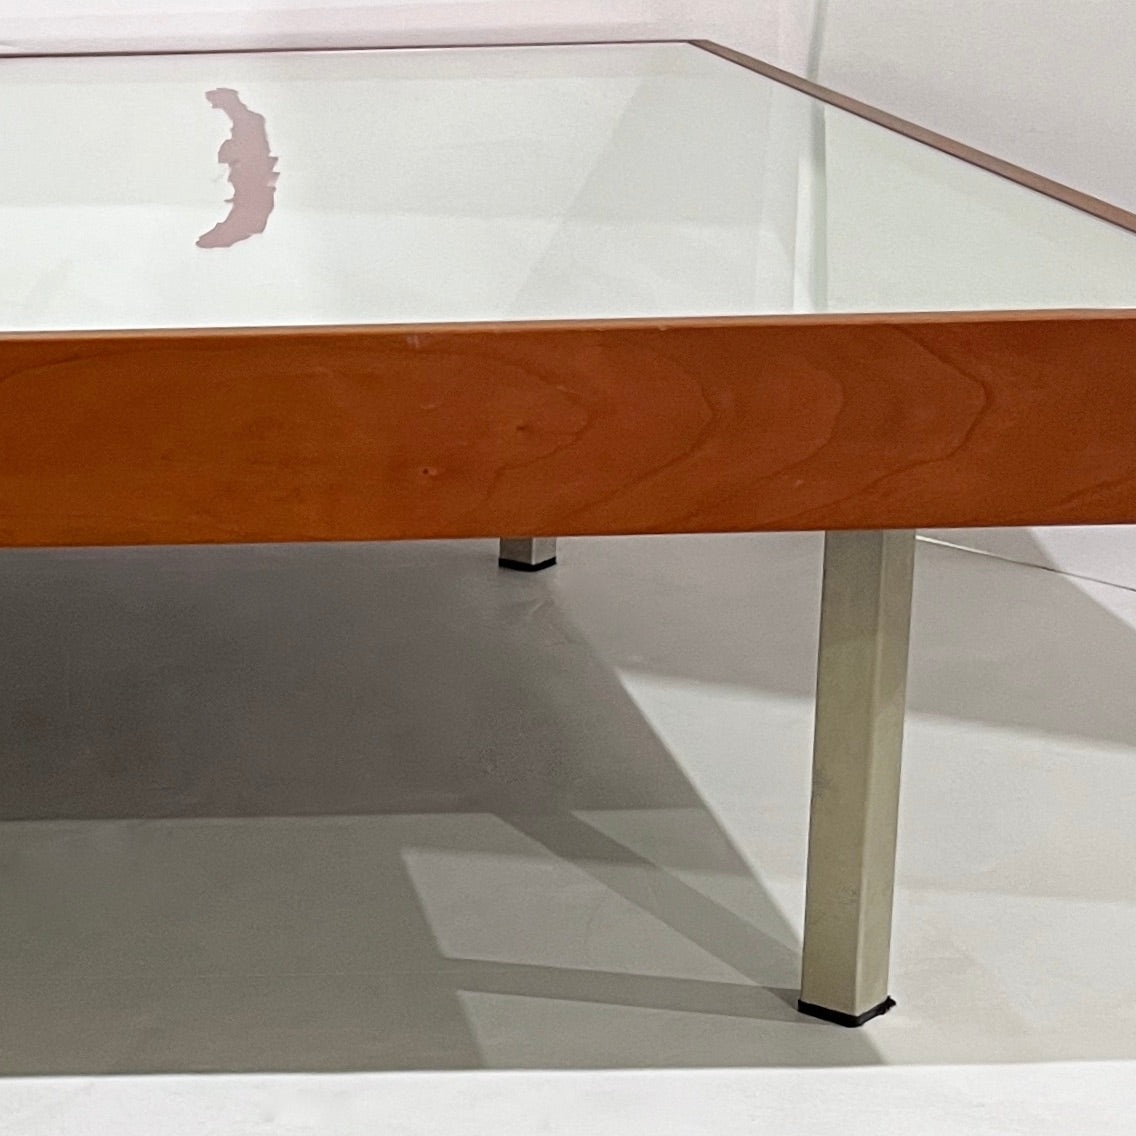 1970s Italian Post-Modern Pair of Mirrored Cherry Wood Eglomise Coffee Tables